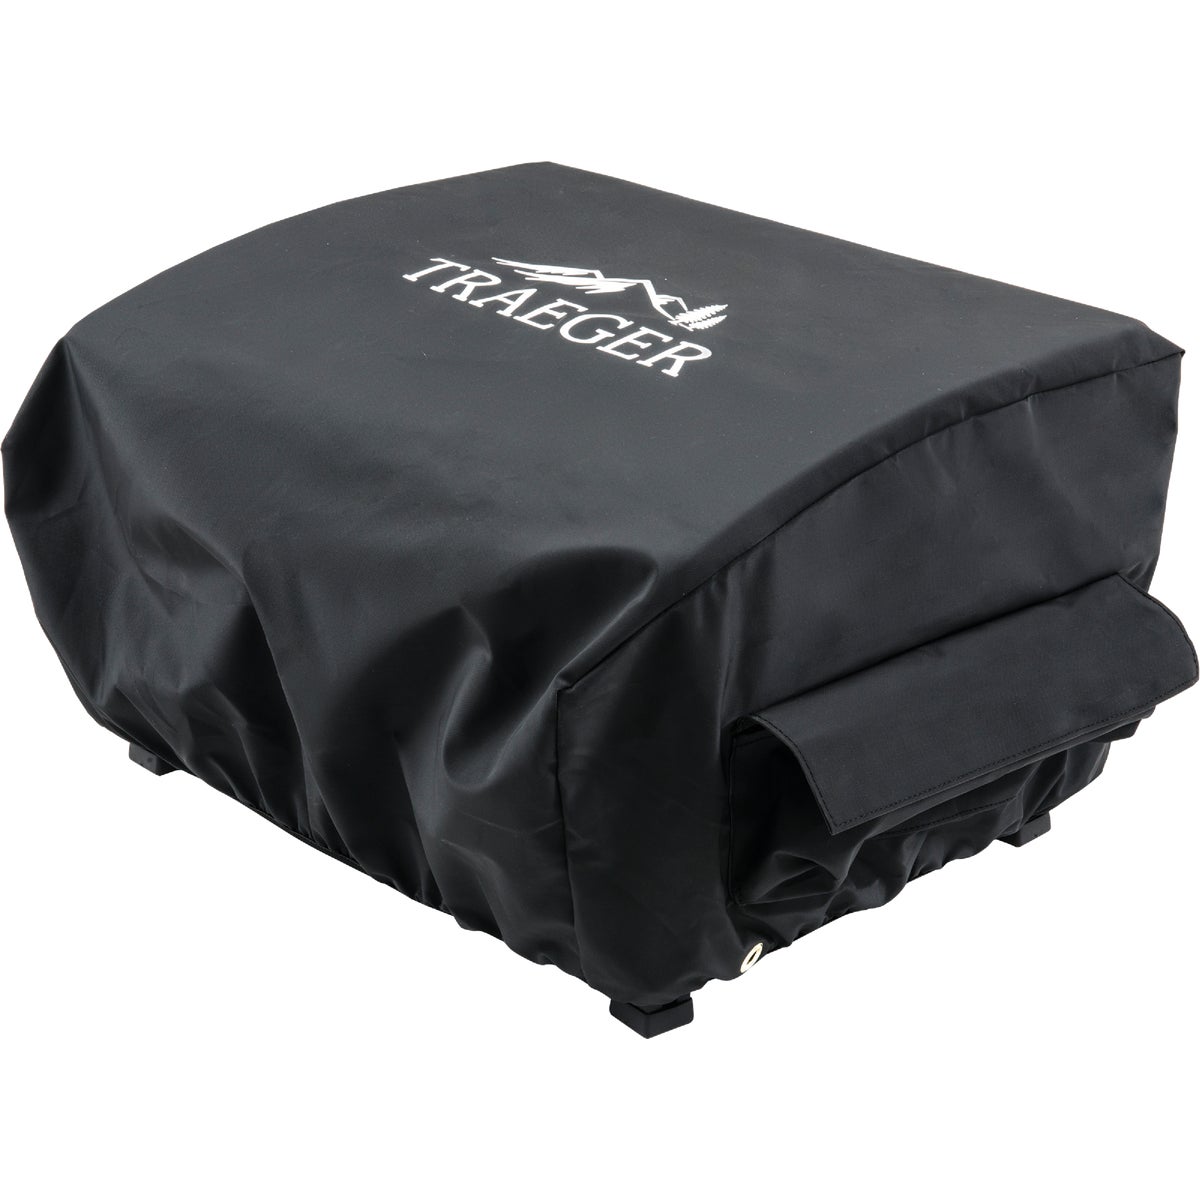 Item 801971, Heavy-duty grill cover compatible with Traeger Scout &amp; Ranger tabletop 